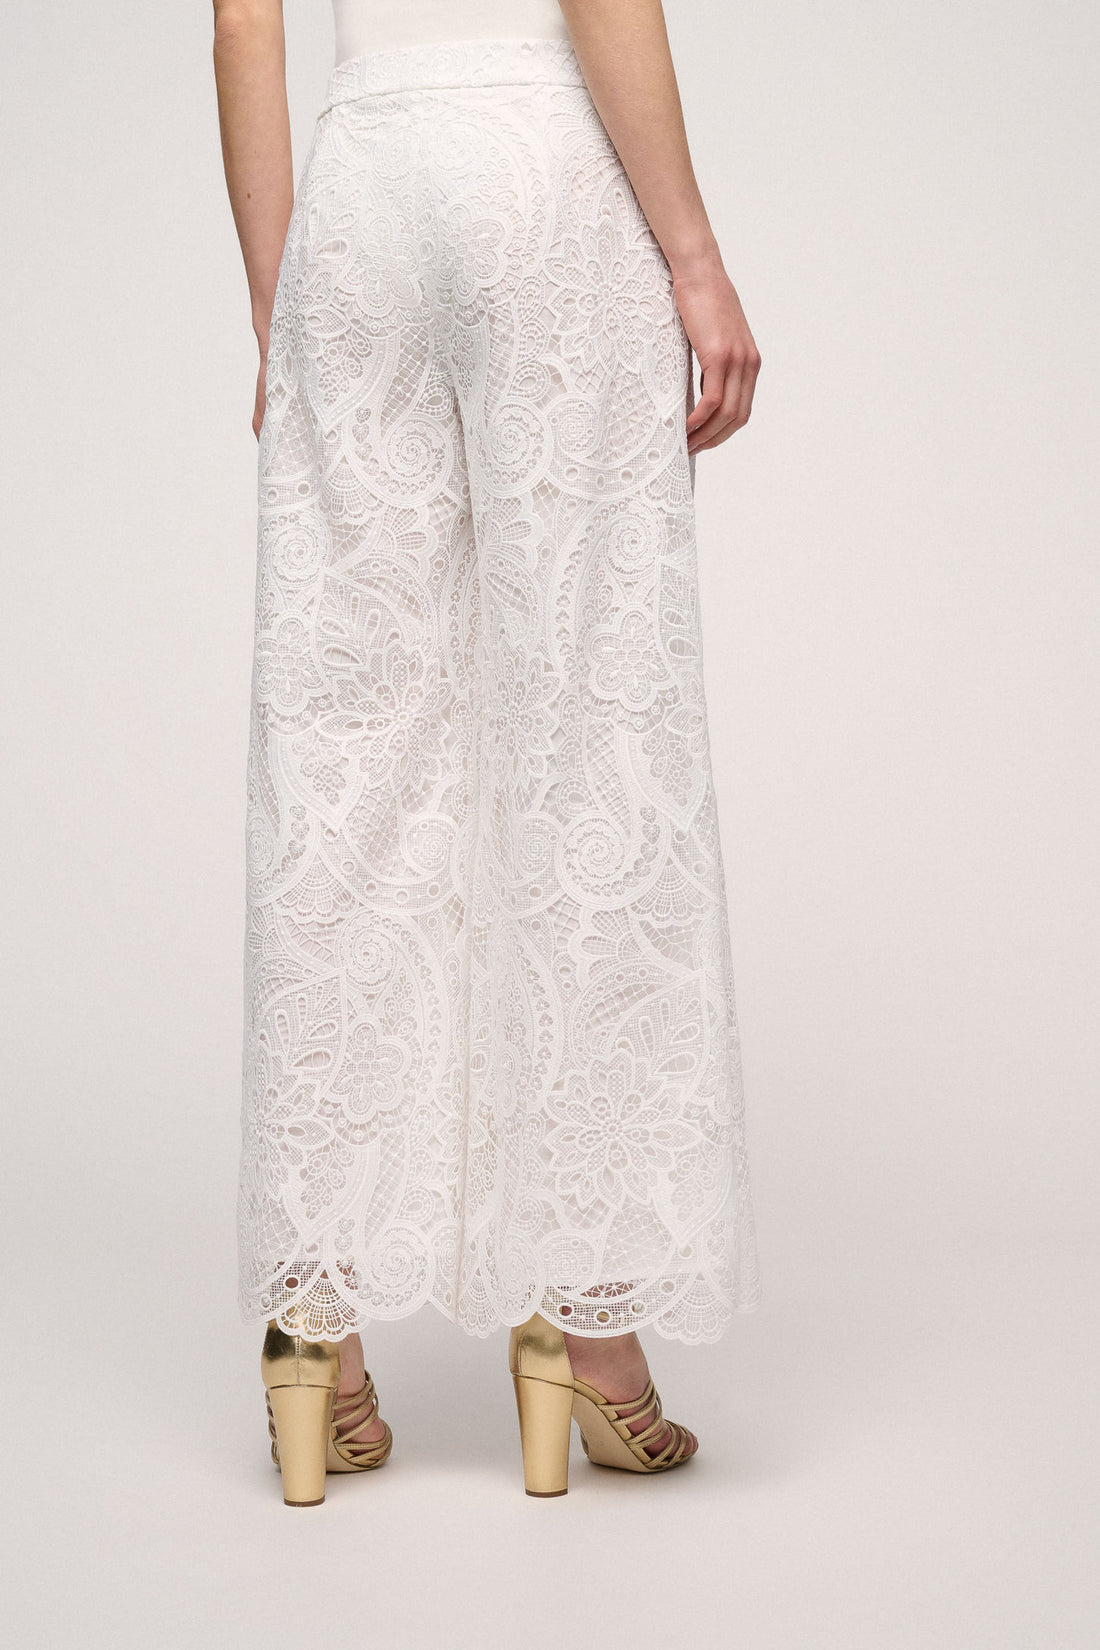 Paisley Embroidery Lace Trousers_Altea_0202 0202_02